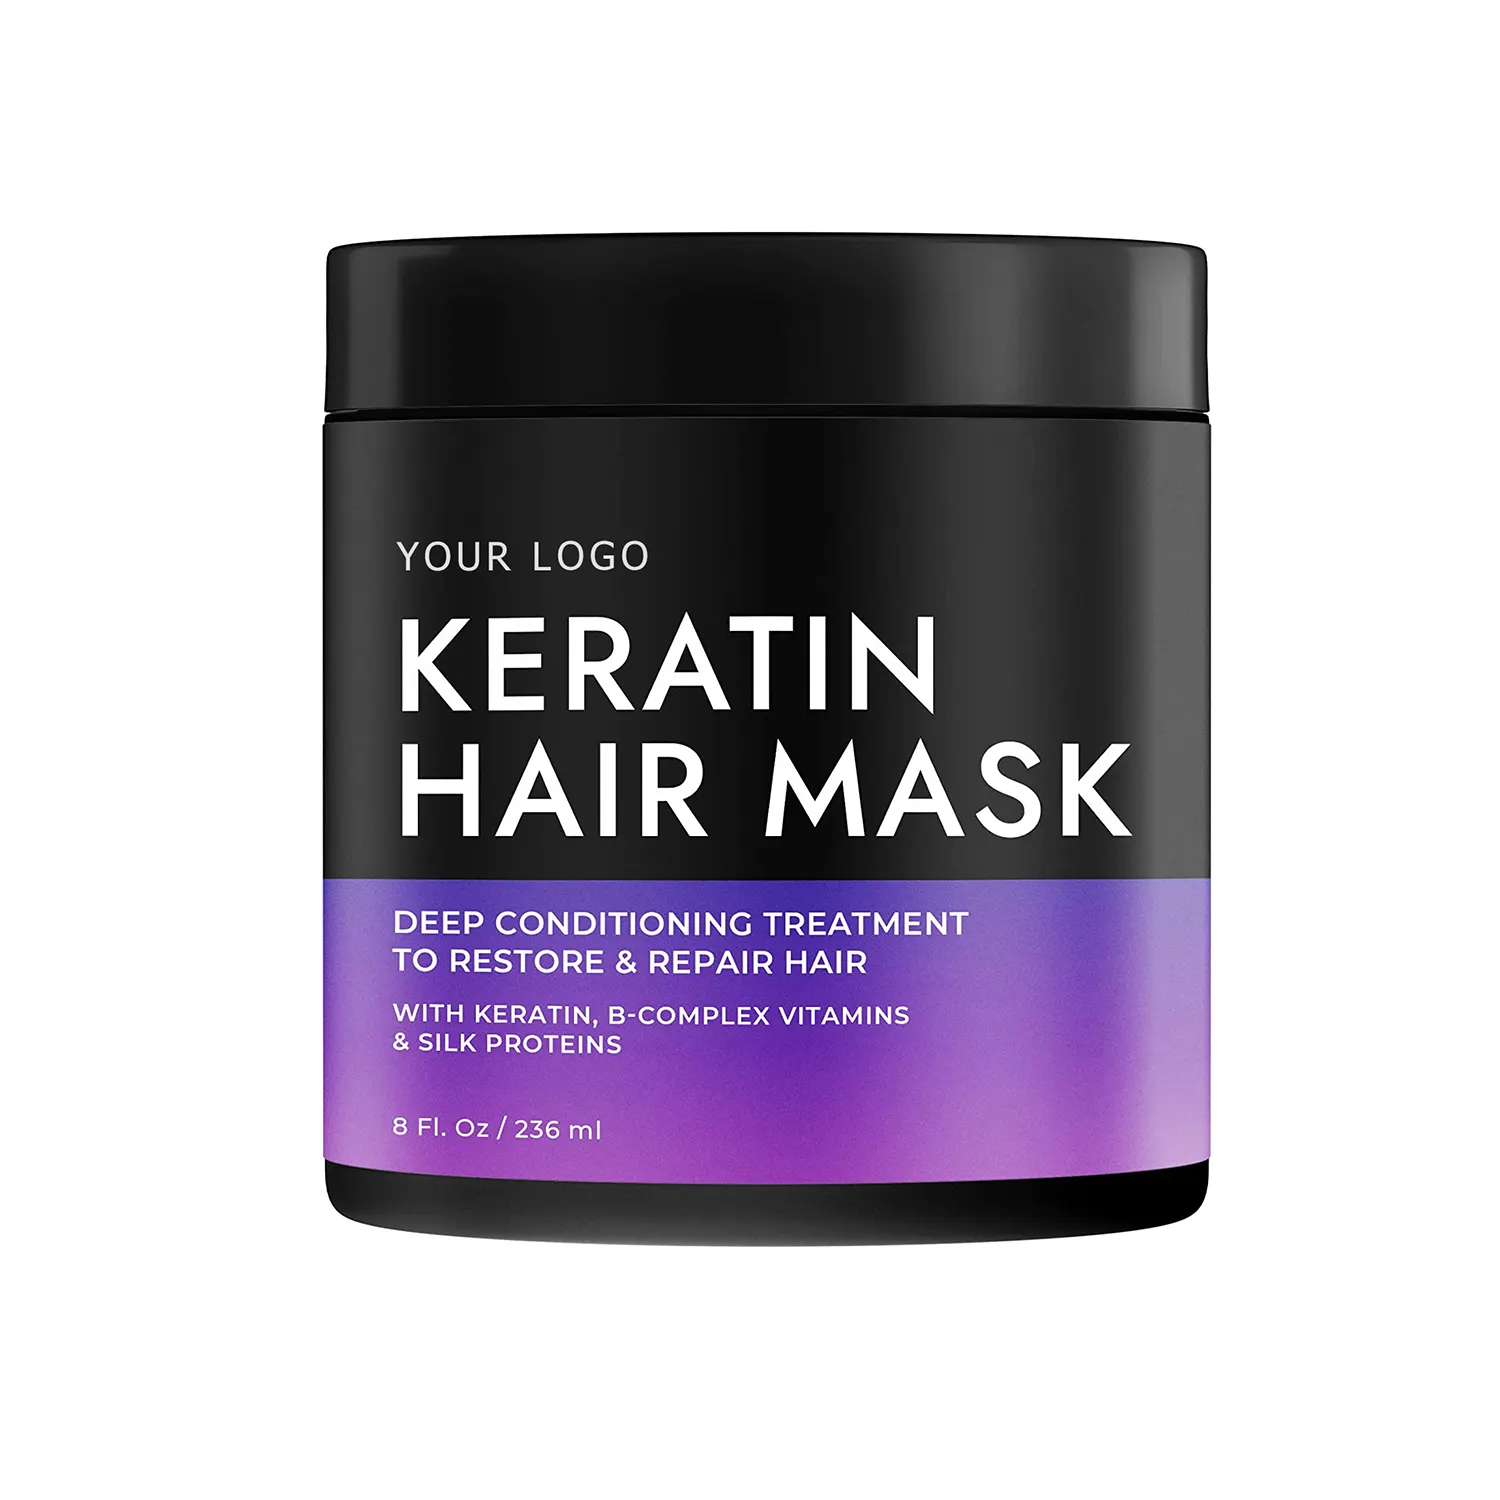 2023 New Arrival custom hair mask manufacturer with keratin B-complex vitamins silk proteins hair mask